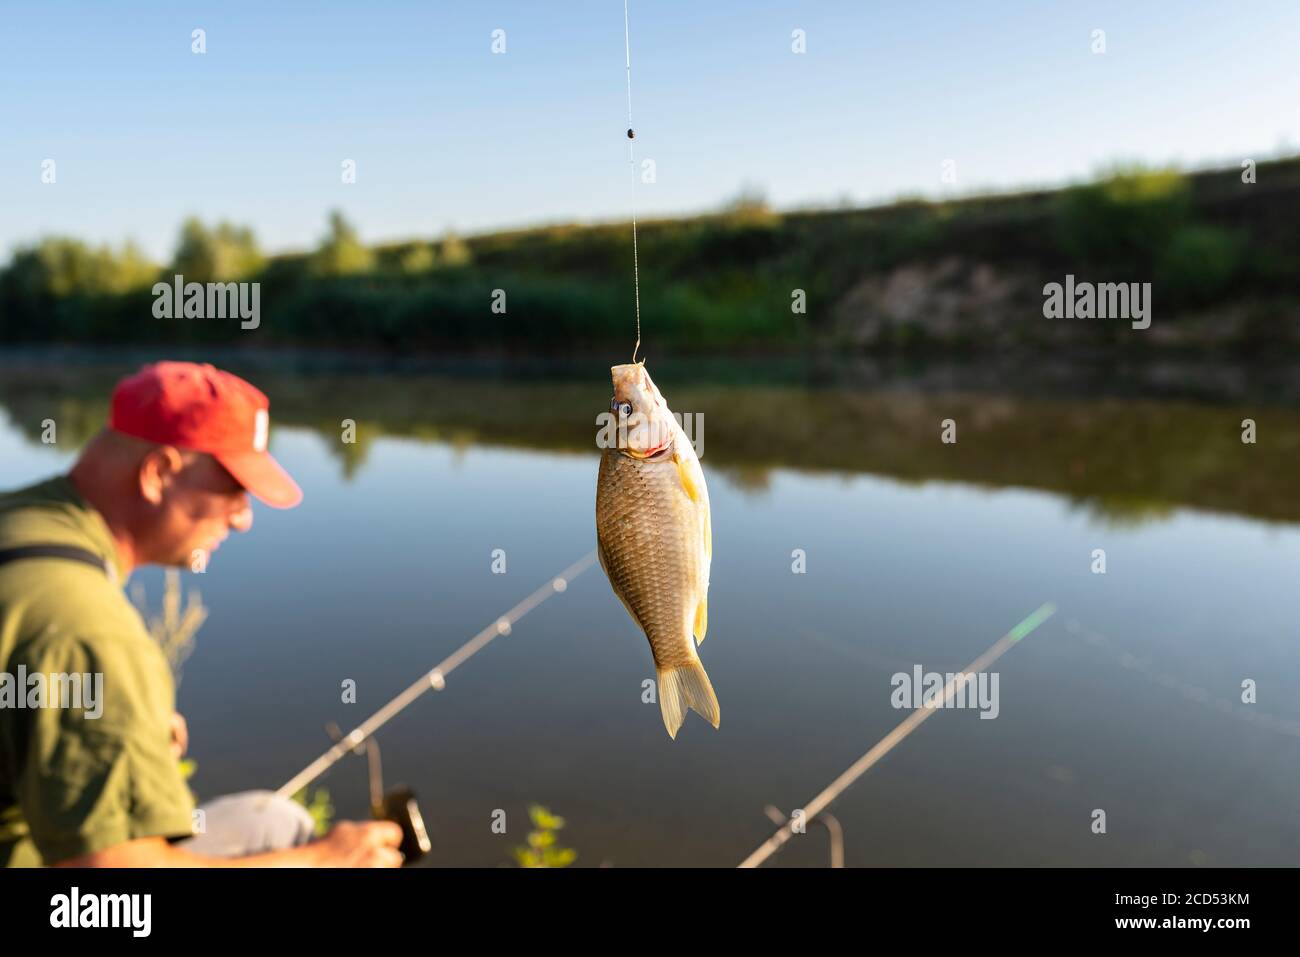 https://c8.alamy.com/comp/2CD53KM/crucian-fish-caught-on-bait-by-the-lake-hanging-on-a-hook-on-a-fishing-rod-in-the-background-an-angler-catching-fishes-2CD53KM.jpg